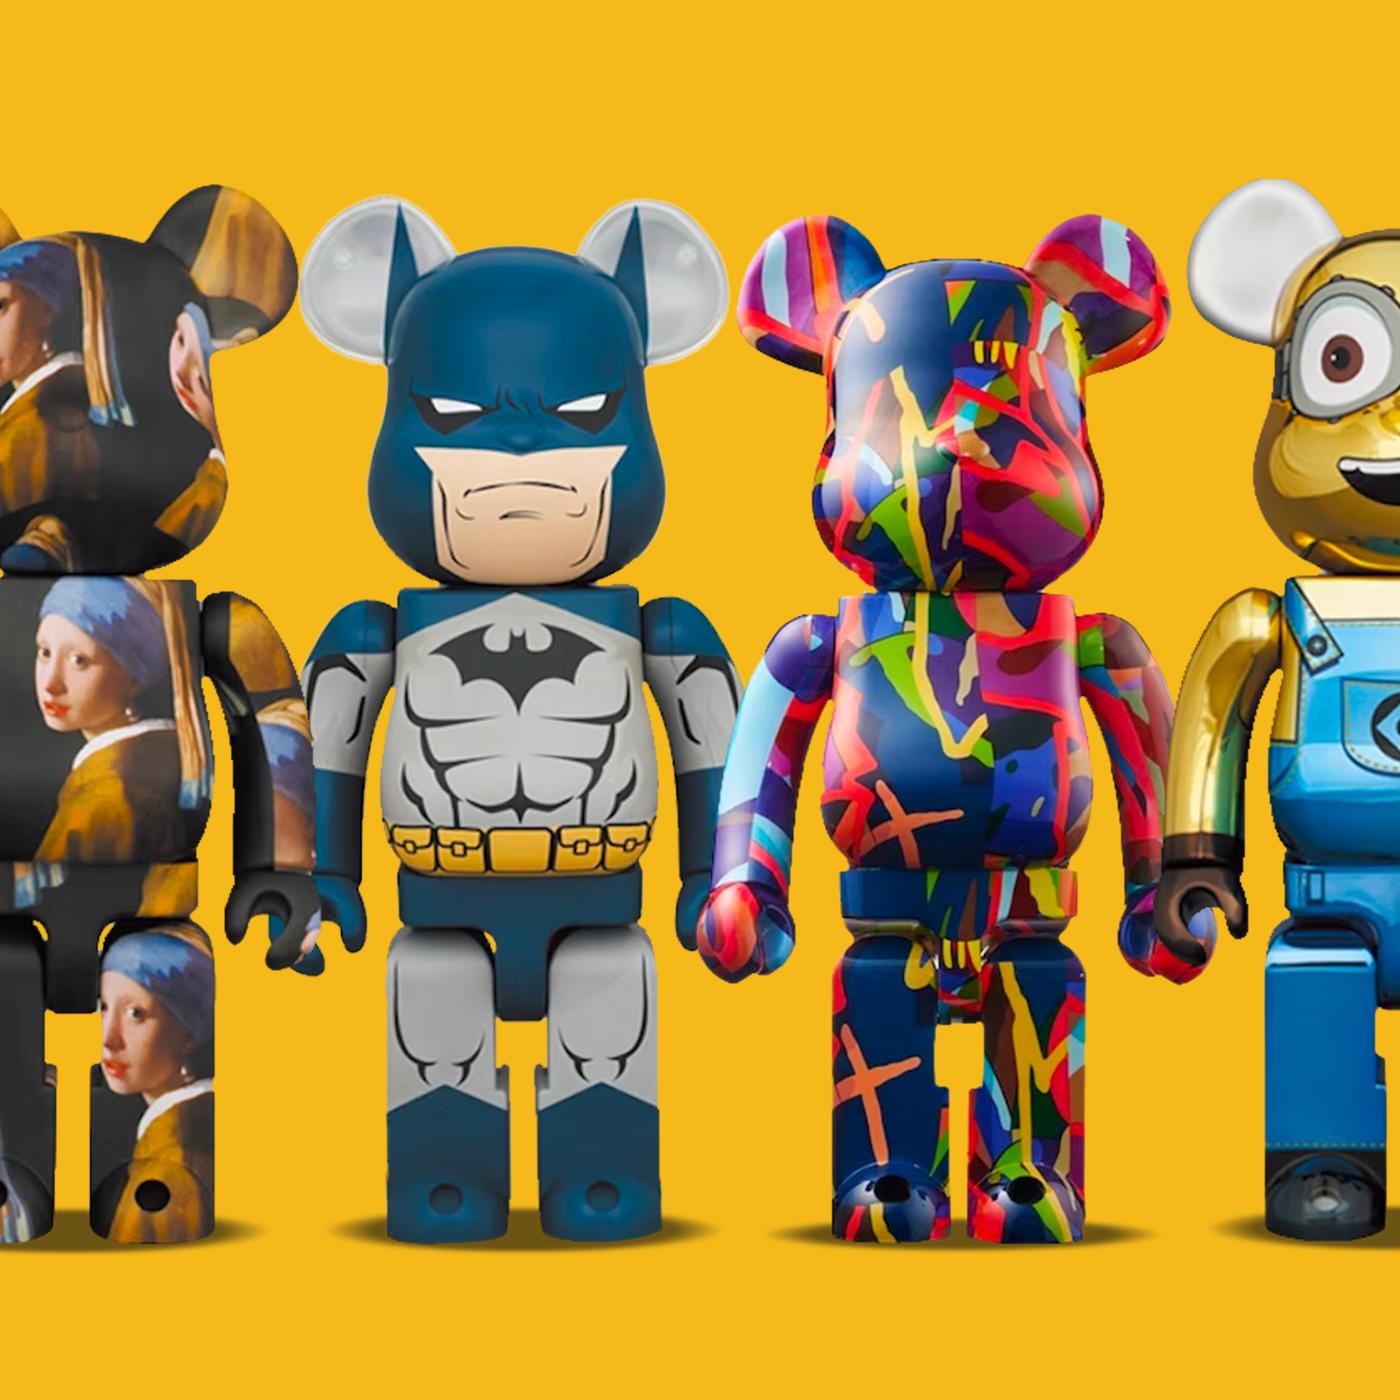 These 10 Bearbrick Figures Rule the Market in 2023